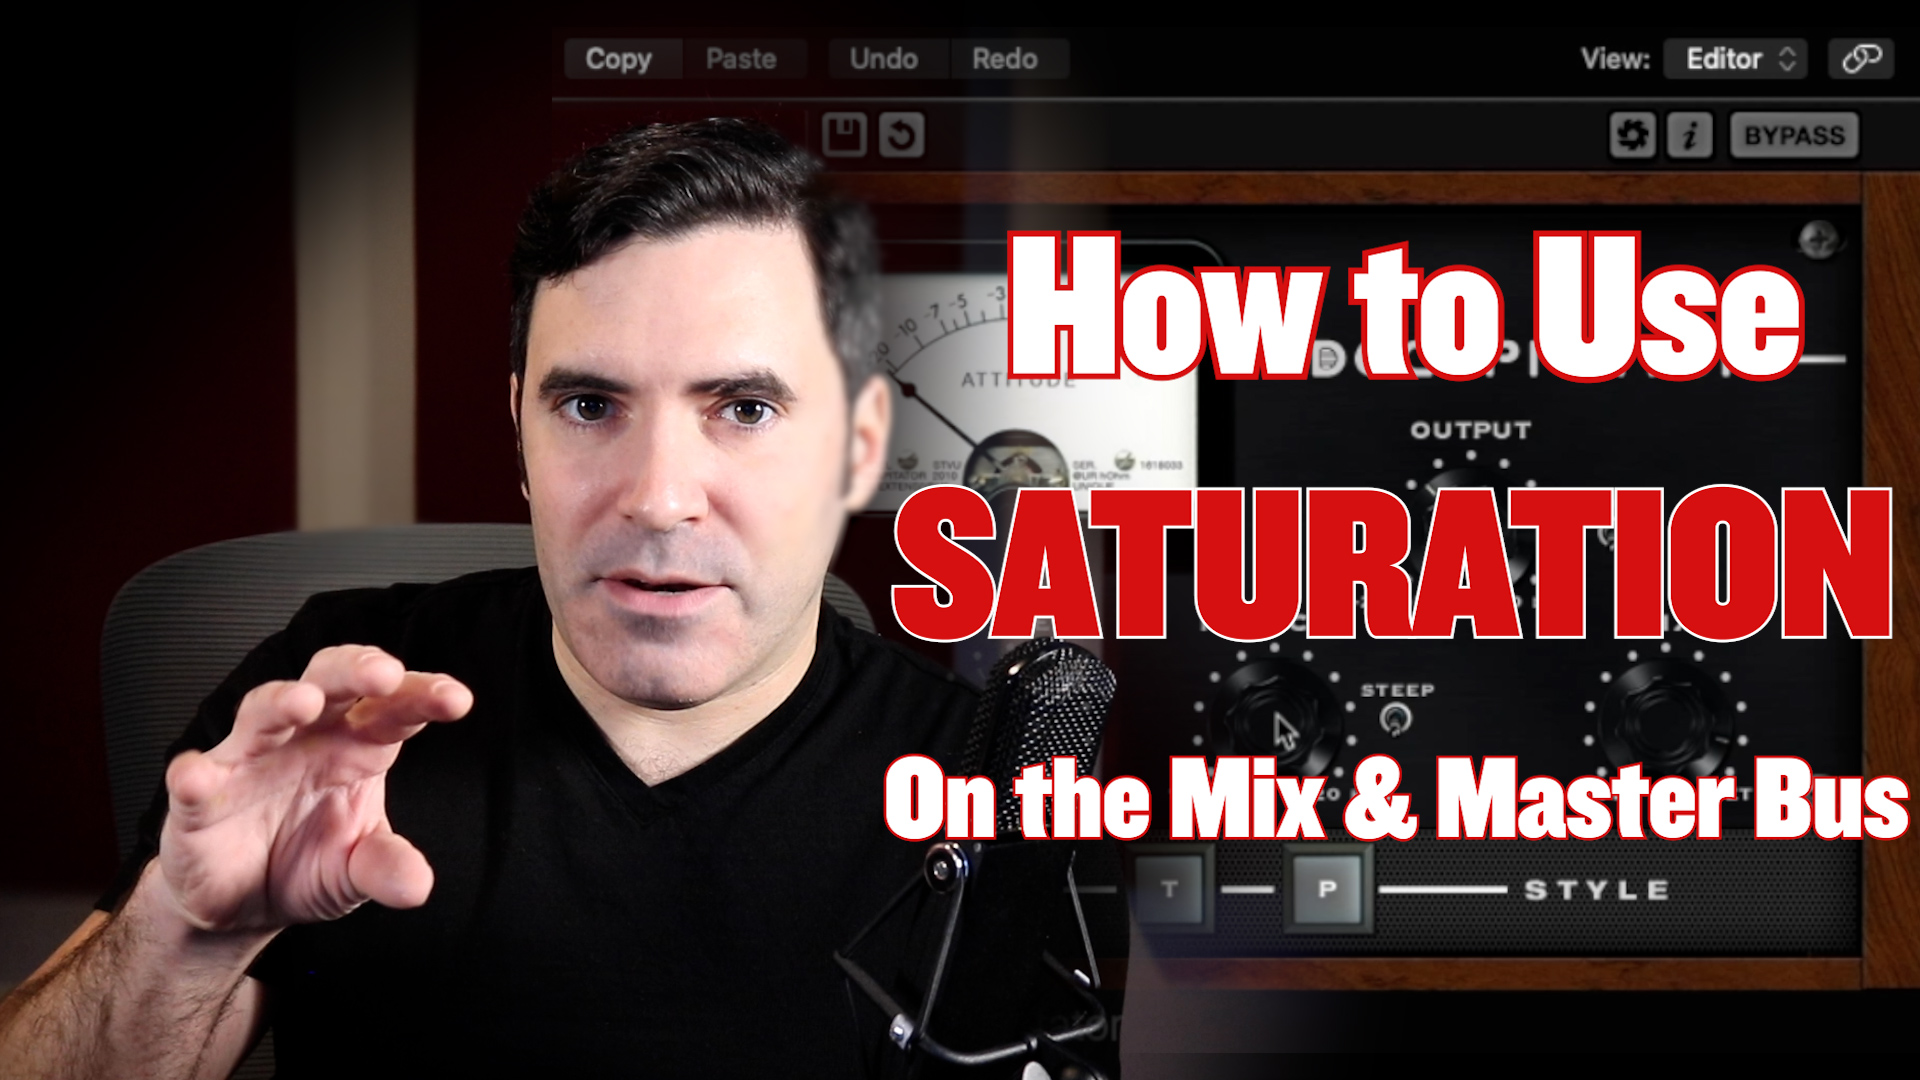 How to Use Saturation on the Mix & Master Bus